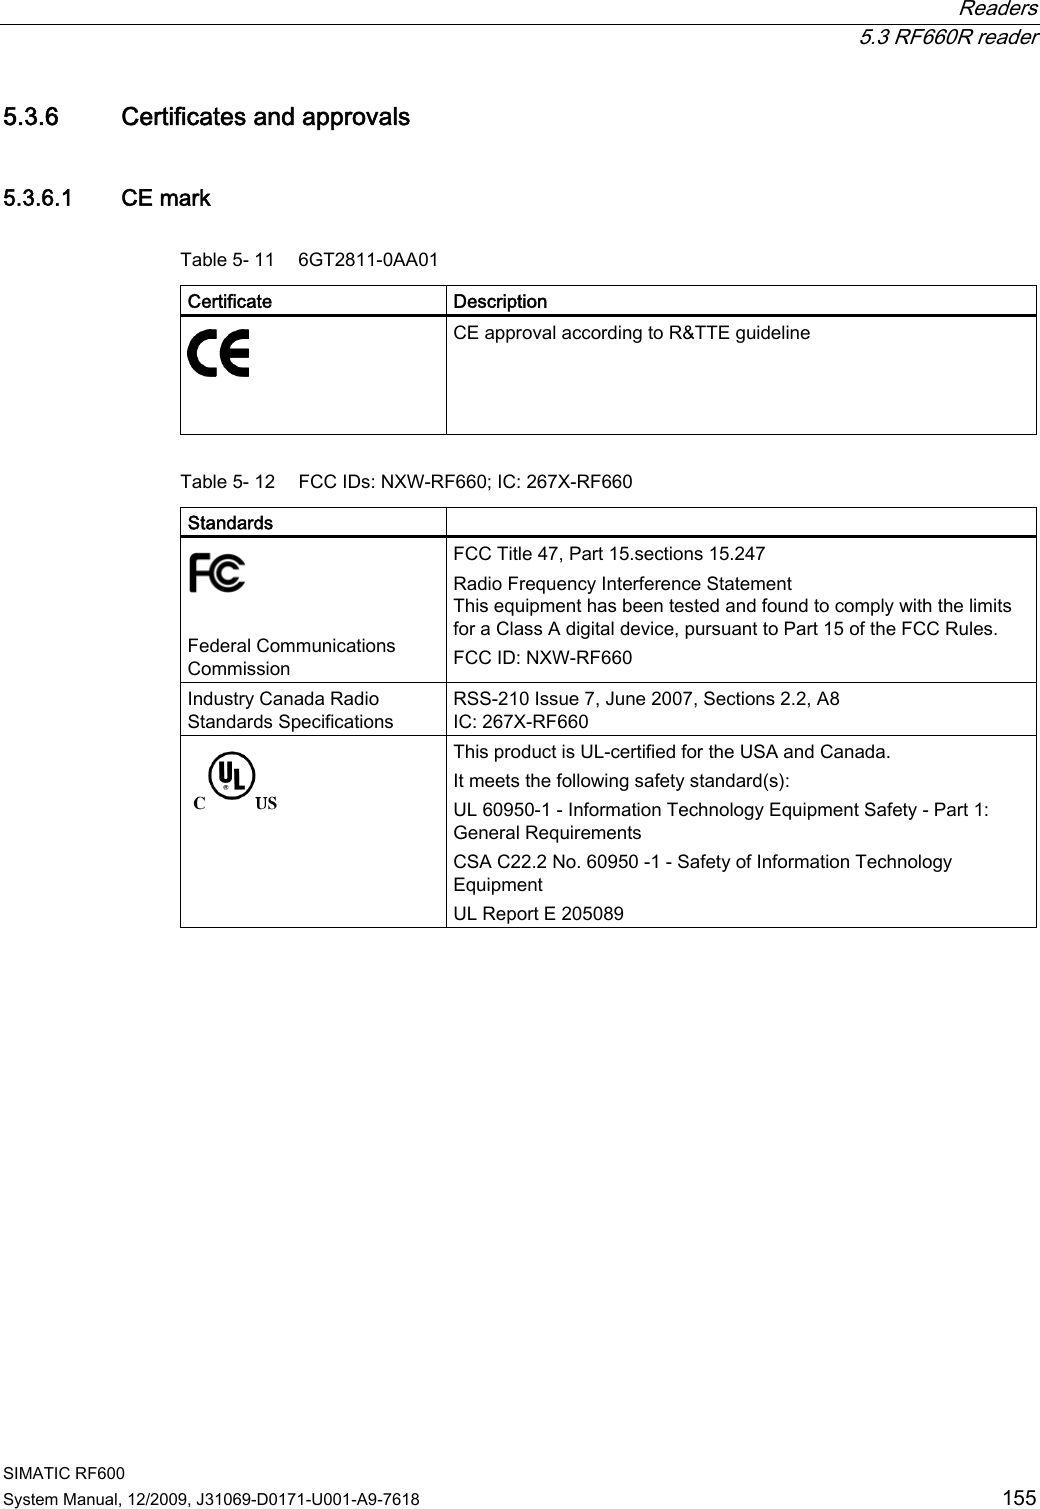  Readers  5.3 RF660R reader SIMATIC RF600 System Manual, 12/2009, J31069-D0171-U001-A9-7618  155 5.3.6 Certificates and approvals 5.3.6.1 CE mark Table 5- 11  6GT2811-0AA01 Certificate  Description    CE approval according to R&amp;TTE guideline Table 5- 12  FCC IDs: NXW-RF660; IC: 267X-RF660 Standards     Federal Communications Commission  FCC Title 47, Part 15.sections 15.247 Radio Frequency Interference Statement  This equipment has been tested and found to comply with the limits for a Class A digital device, pursuant to Part 15 of the FCC Rules. FCC ID: NXW-RF660  Industry Canada Radio Standards Specifications RSS-210 Issue 7, June 2007, Sections 2.2, A8 IC: 267X-RF660  This product is UL-certified for the USA and Canada. It meets the following safety standard(s):  UL 60950-1 - Information Technology Equipment Safety - Part 1: General Requirements CSA C22.2 No. 60950 -1 - Safety of Information Technology Equipment UL Report E 205089 